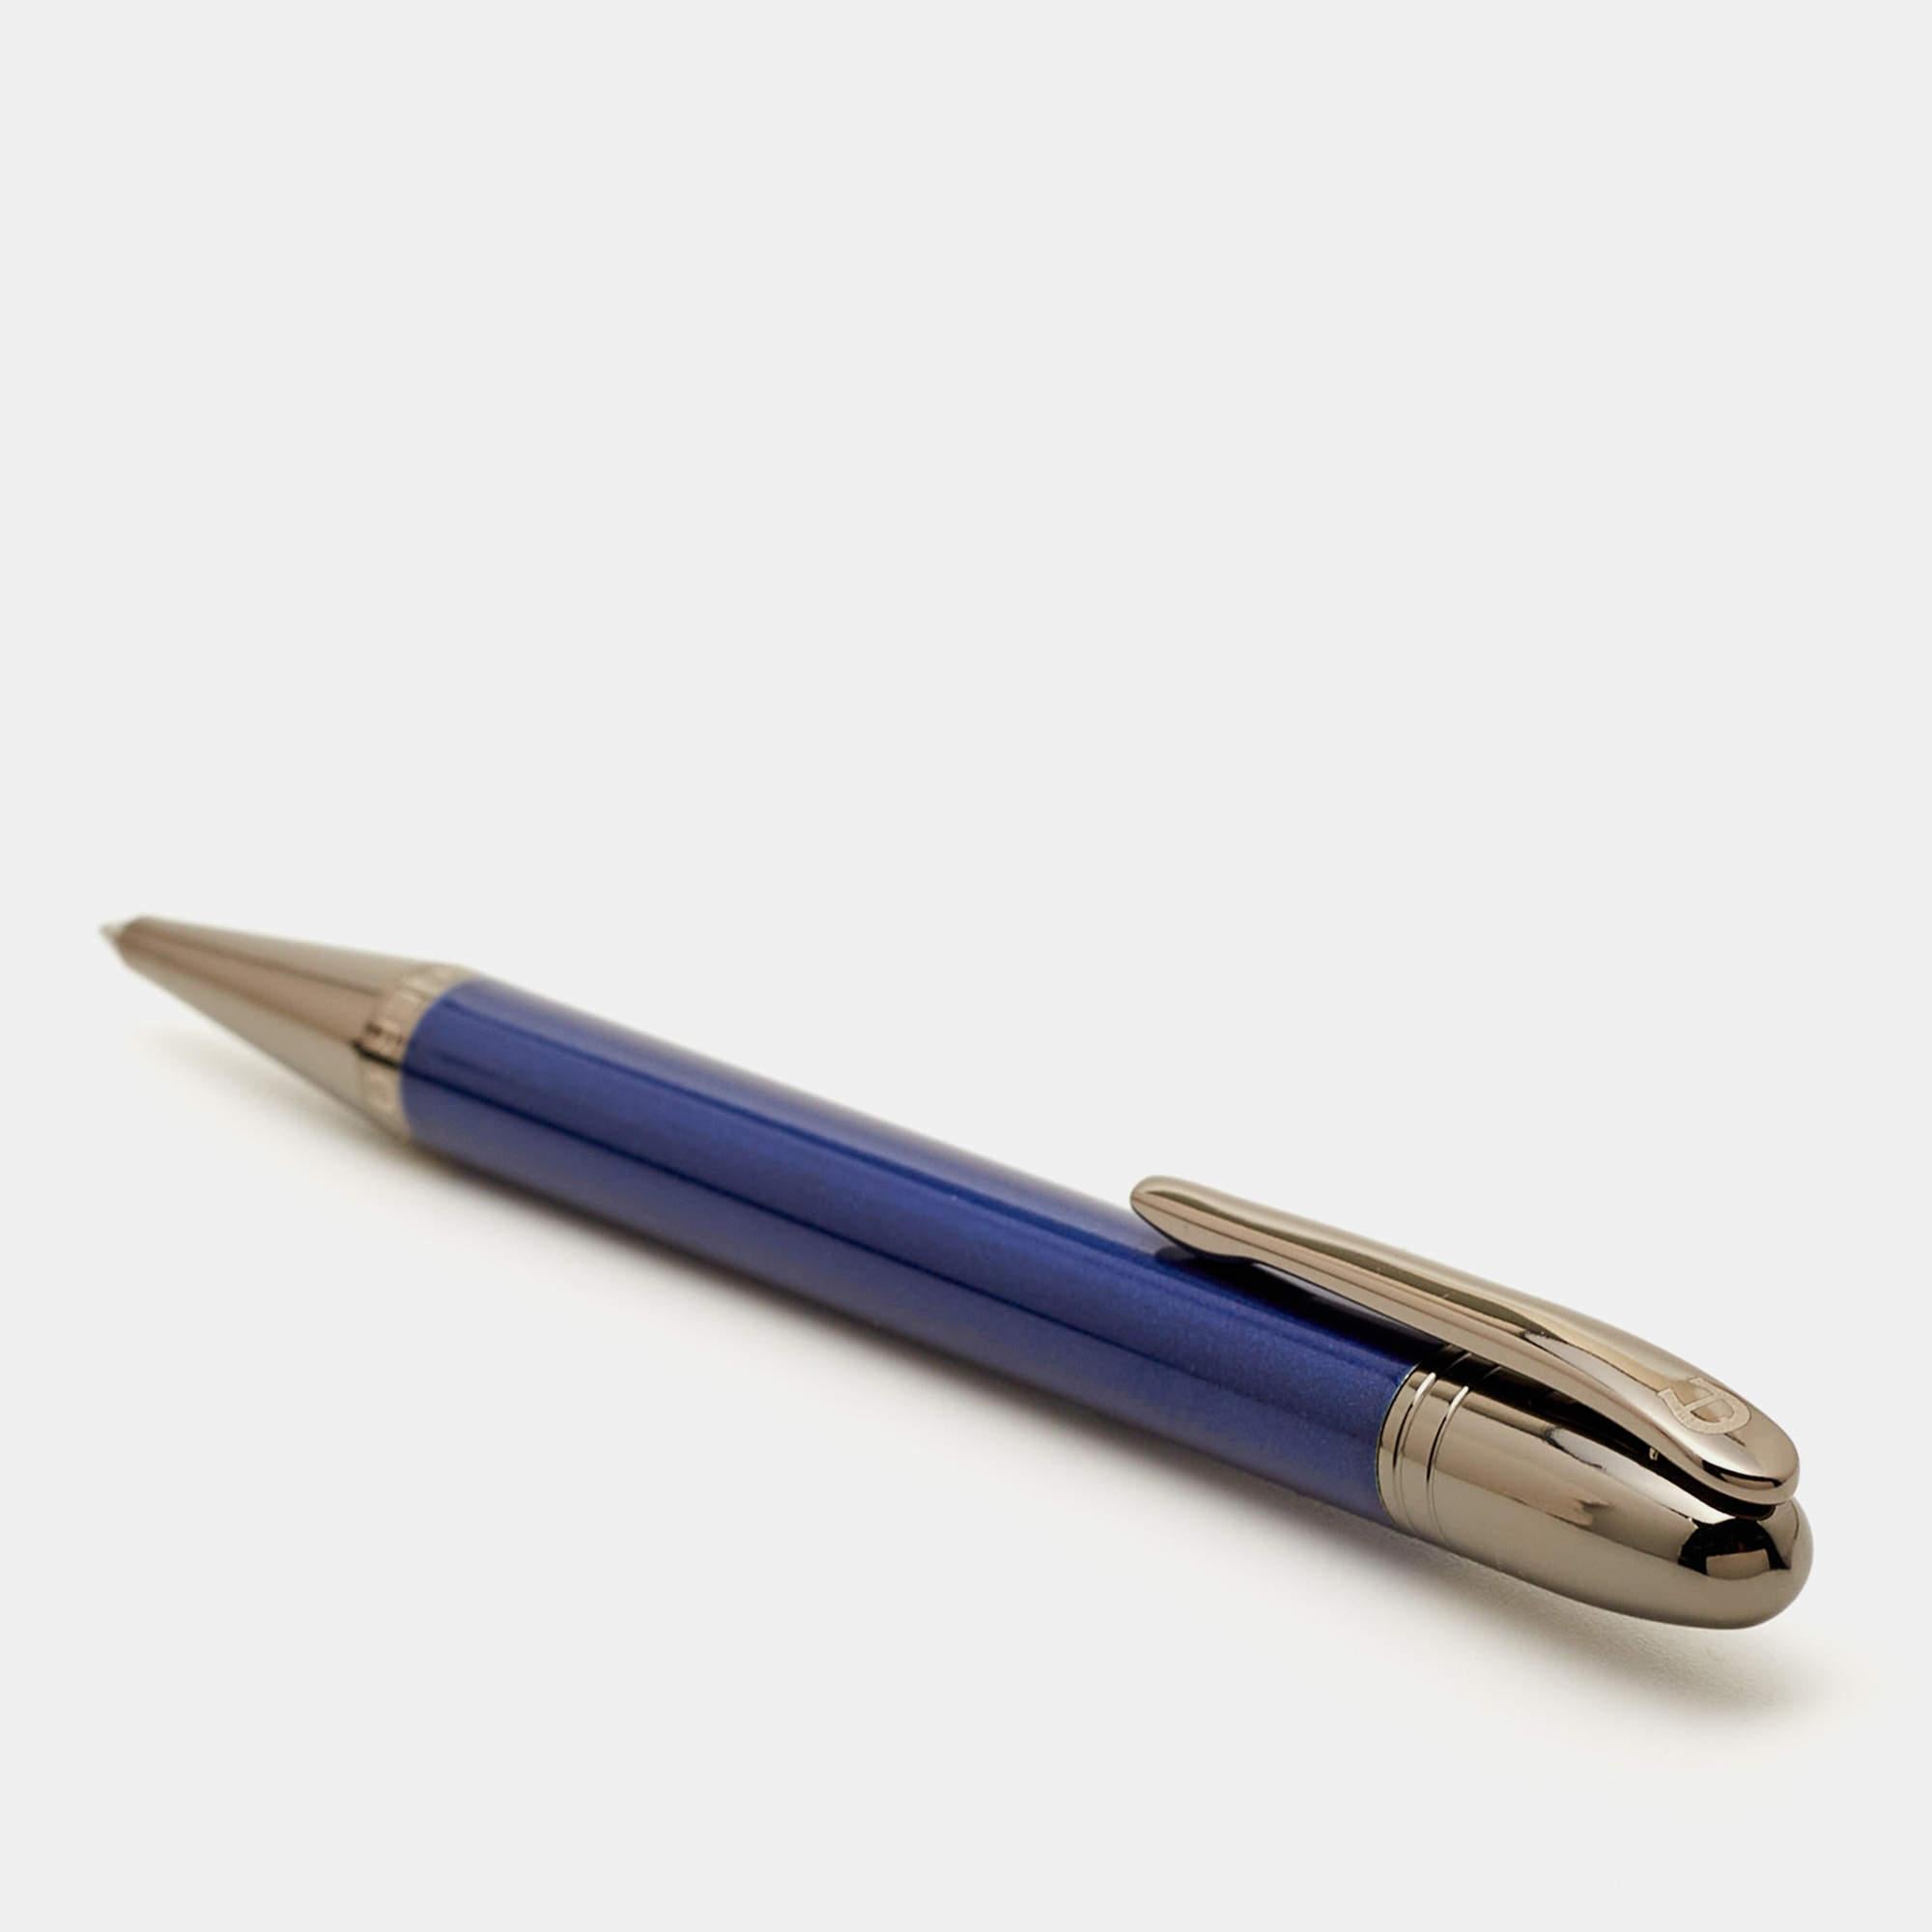 Aigner's ballpoint pen in lacquer and silver-tone metal is defined by quality craftsmanship. It has a sleek shape and just the right details to achieve a luxurious finish.

Includes: Original Box, Original Case